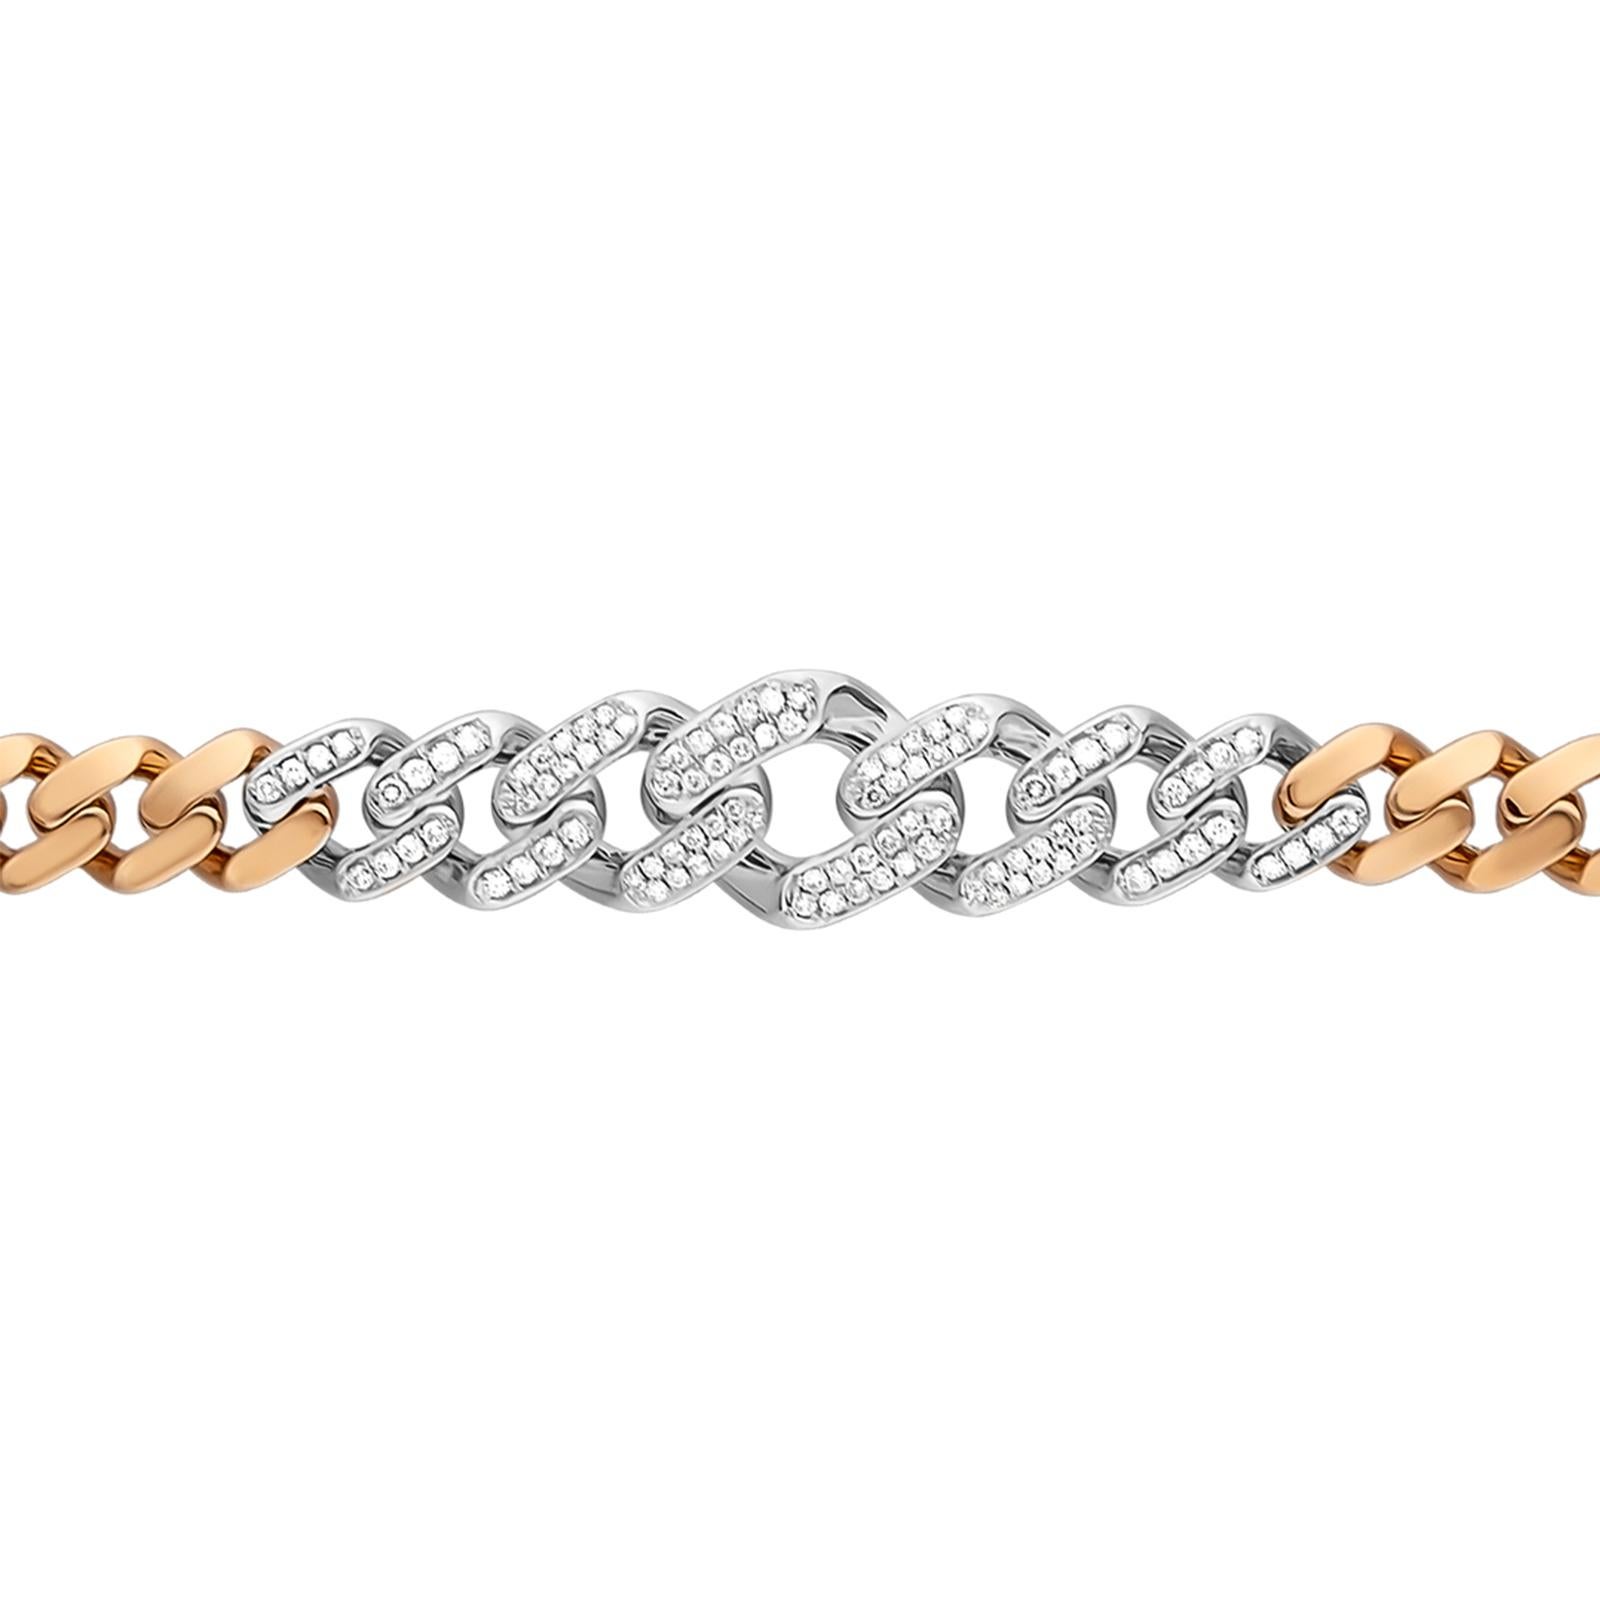 The Cuban Link Chain Has A Solid Masculine Appeal. Approved By Almost All Fashionistas And Big Players. It Is An Essential Part Of Your Collection. 
The Miami Cuban Link Is One That Is A Favorite For It’s Thick, Unique, And Steady Feel.

All